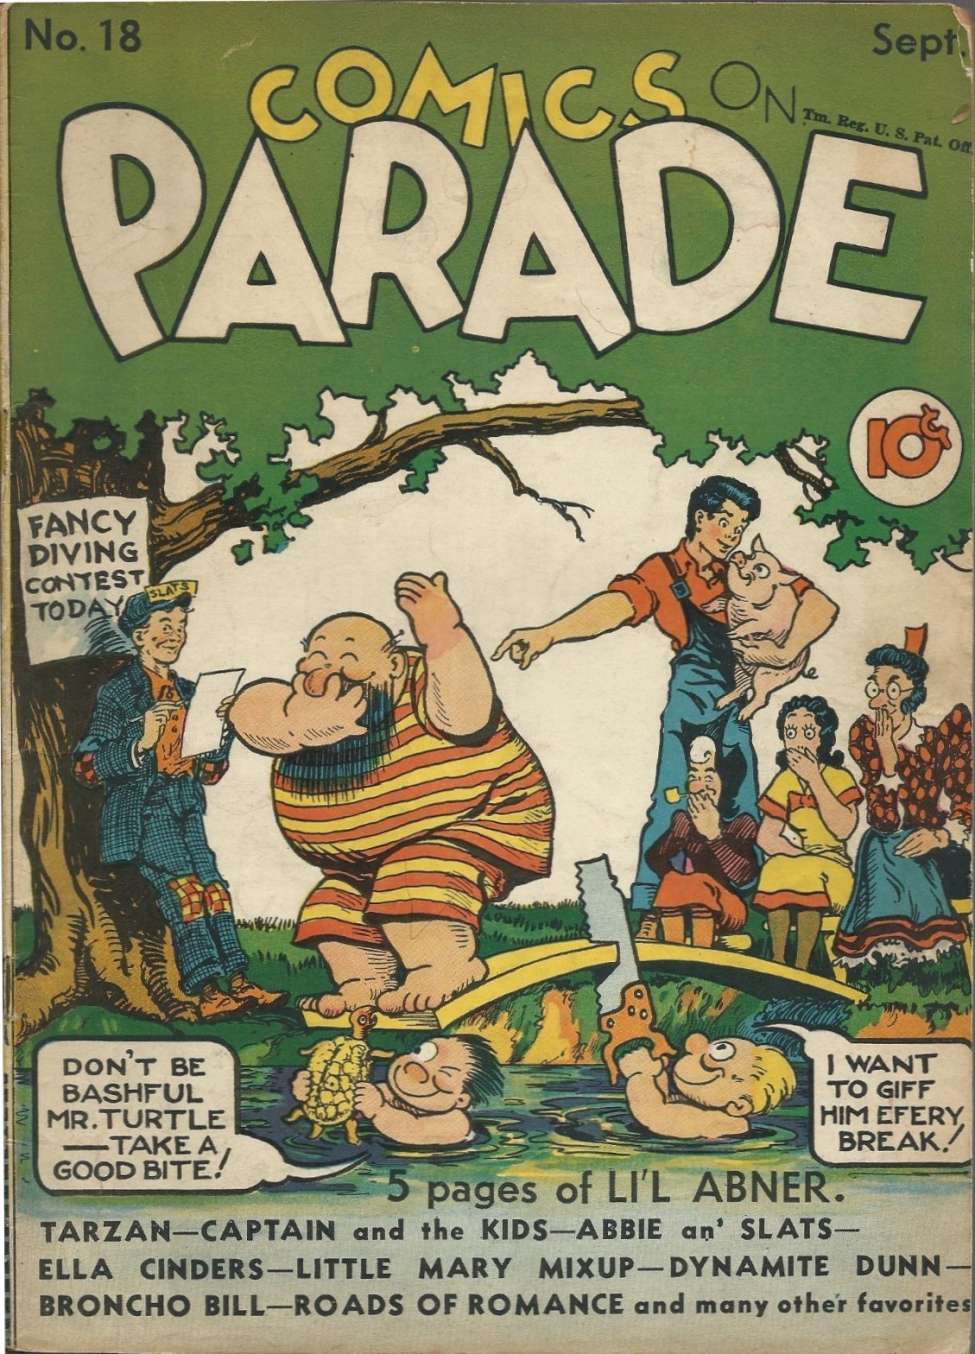 Comic Book Cover For Comics on Parade 18